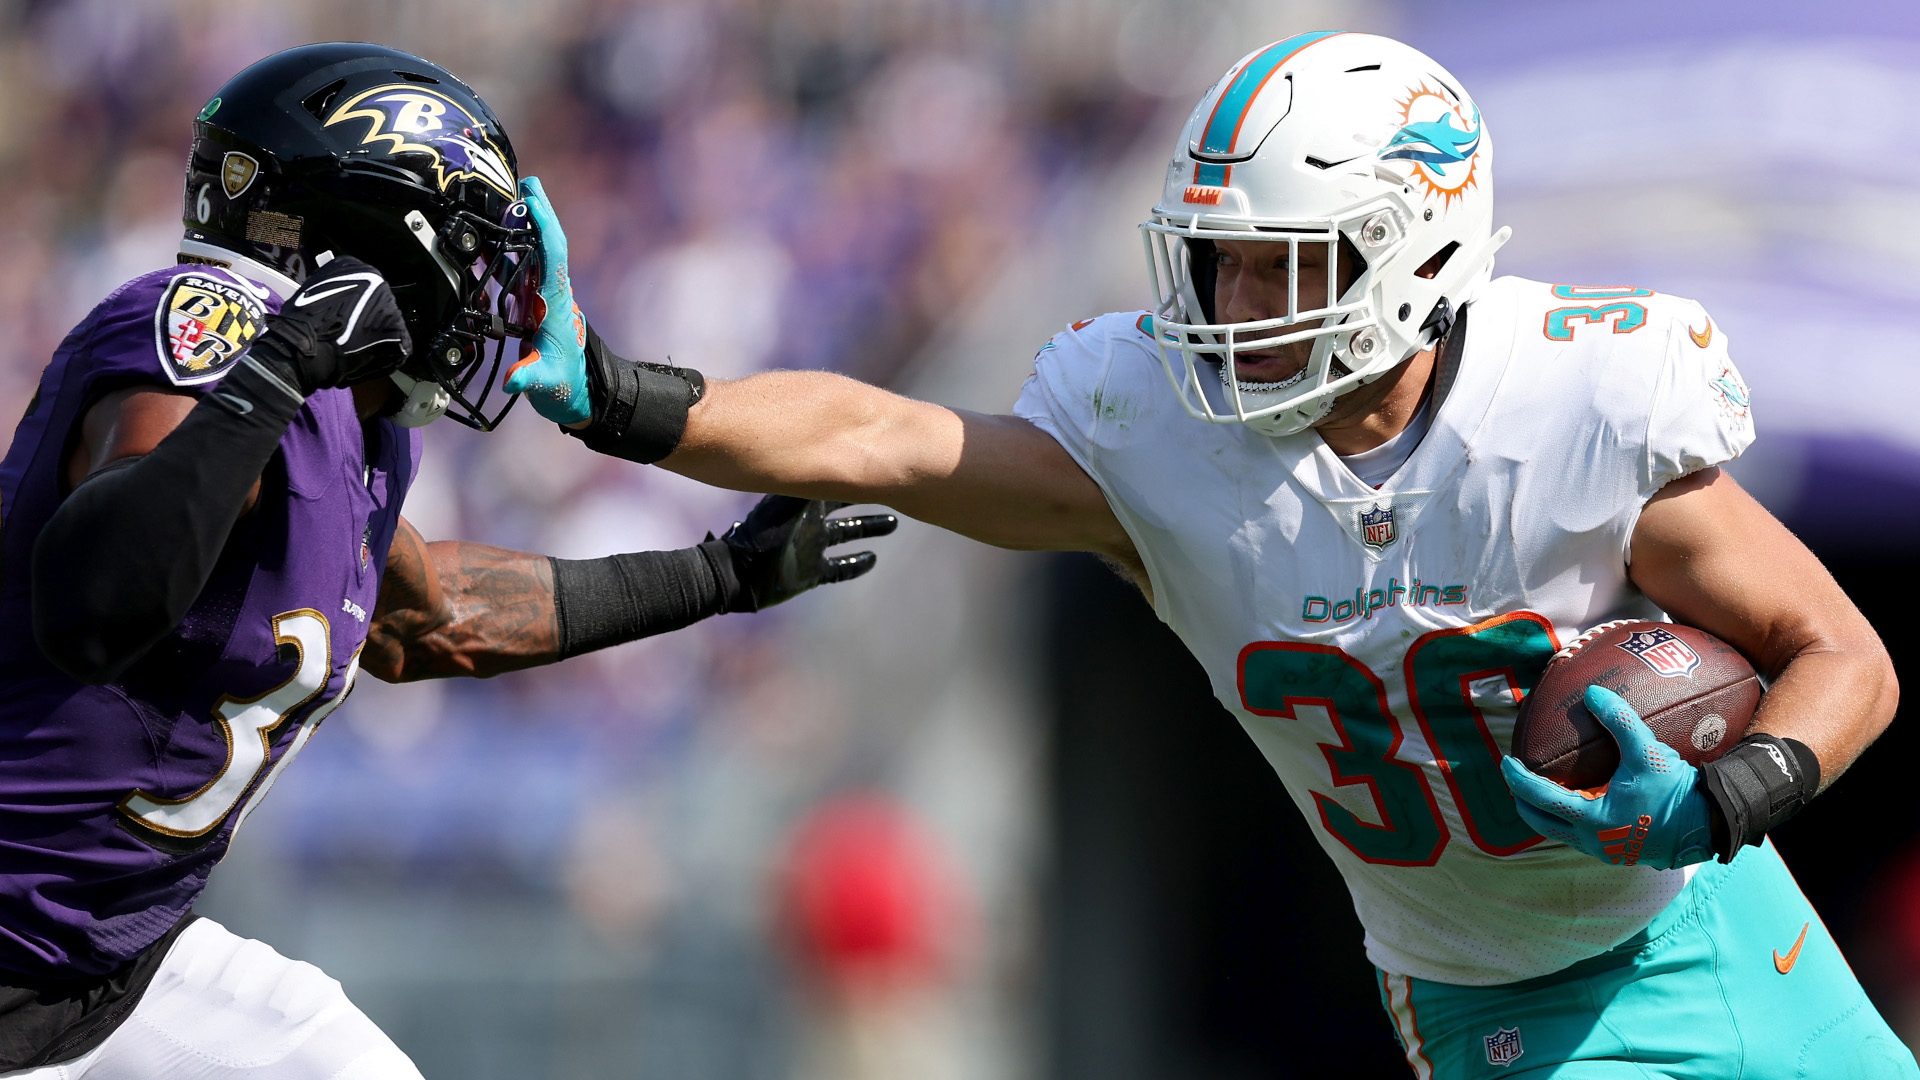 Dolphins Vs Ravens Live Stream How To Watch Nfl Game Online And On Tv Team News Techradar